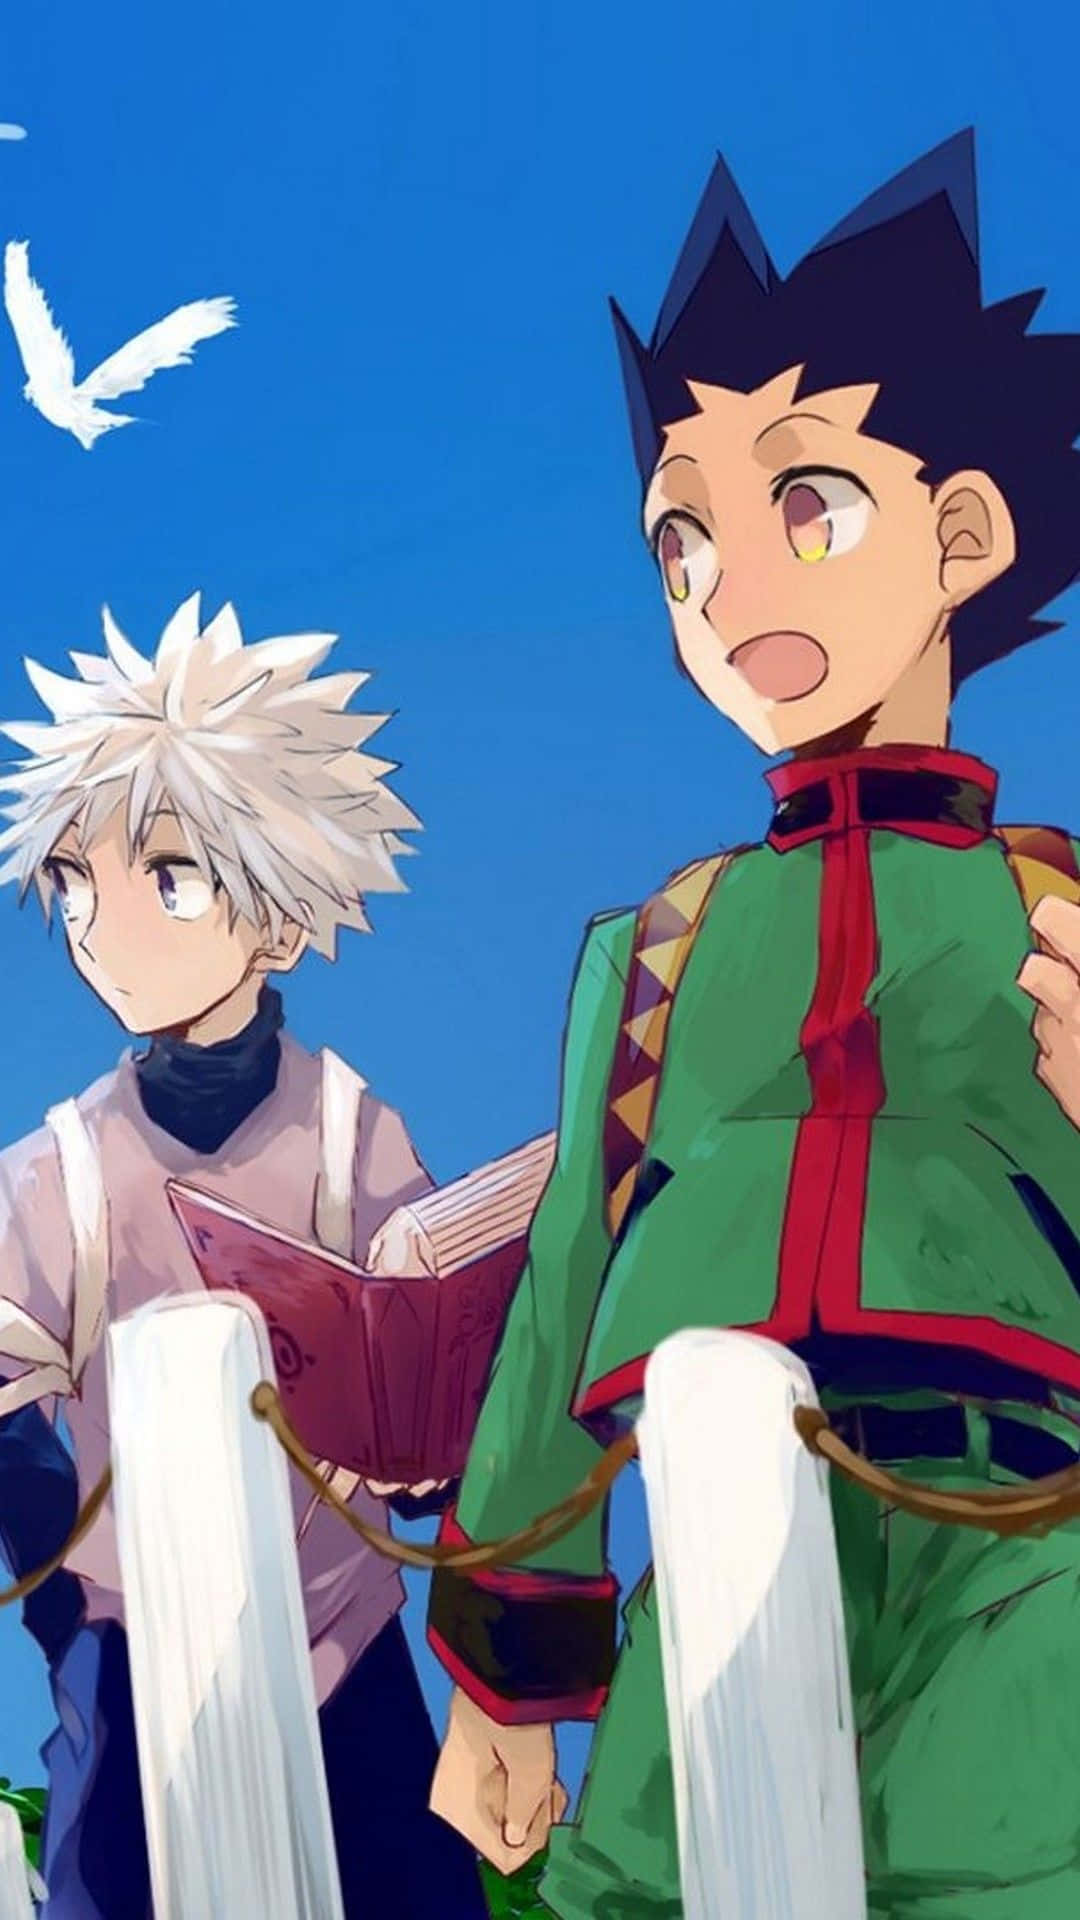 Image  Gon and Killua embracing each other against a background of colorful stars Wallpaper